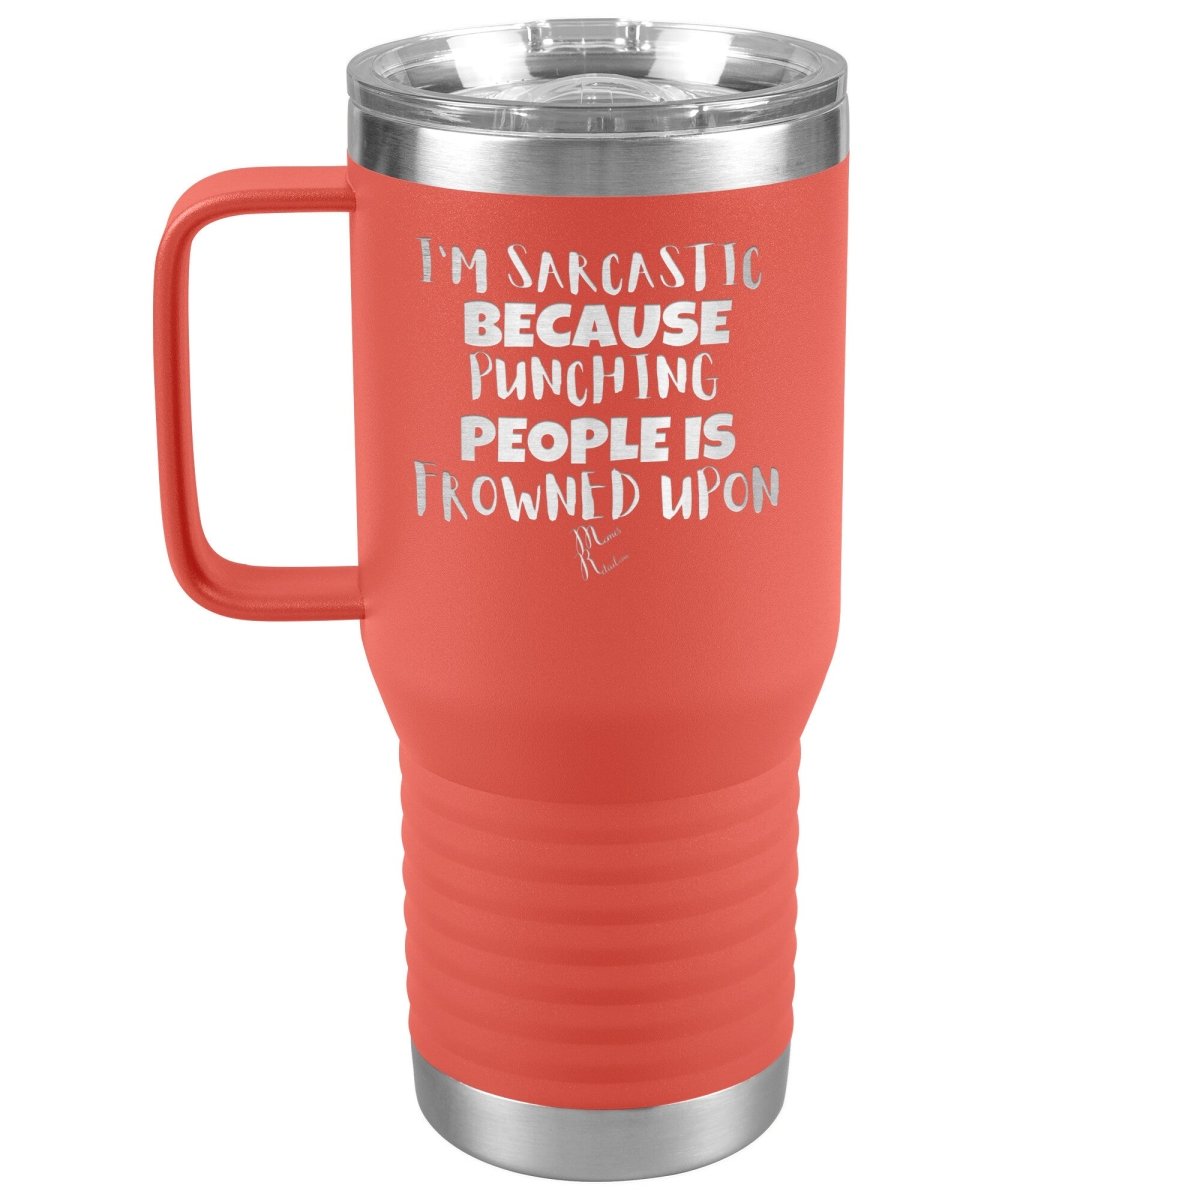 I'm Sarcastic Because Punching People is Frowned Upon Tumblers, 20oz Travel Tumbler / Coral - MemesRetail.com